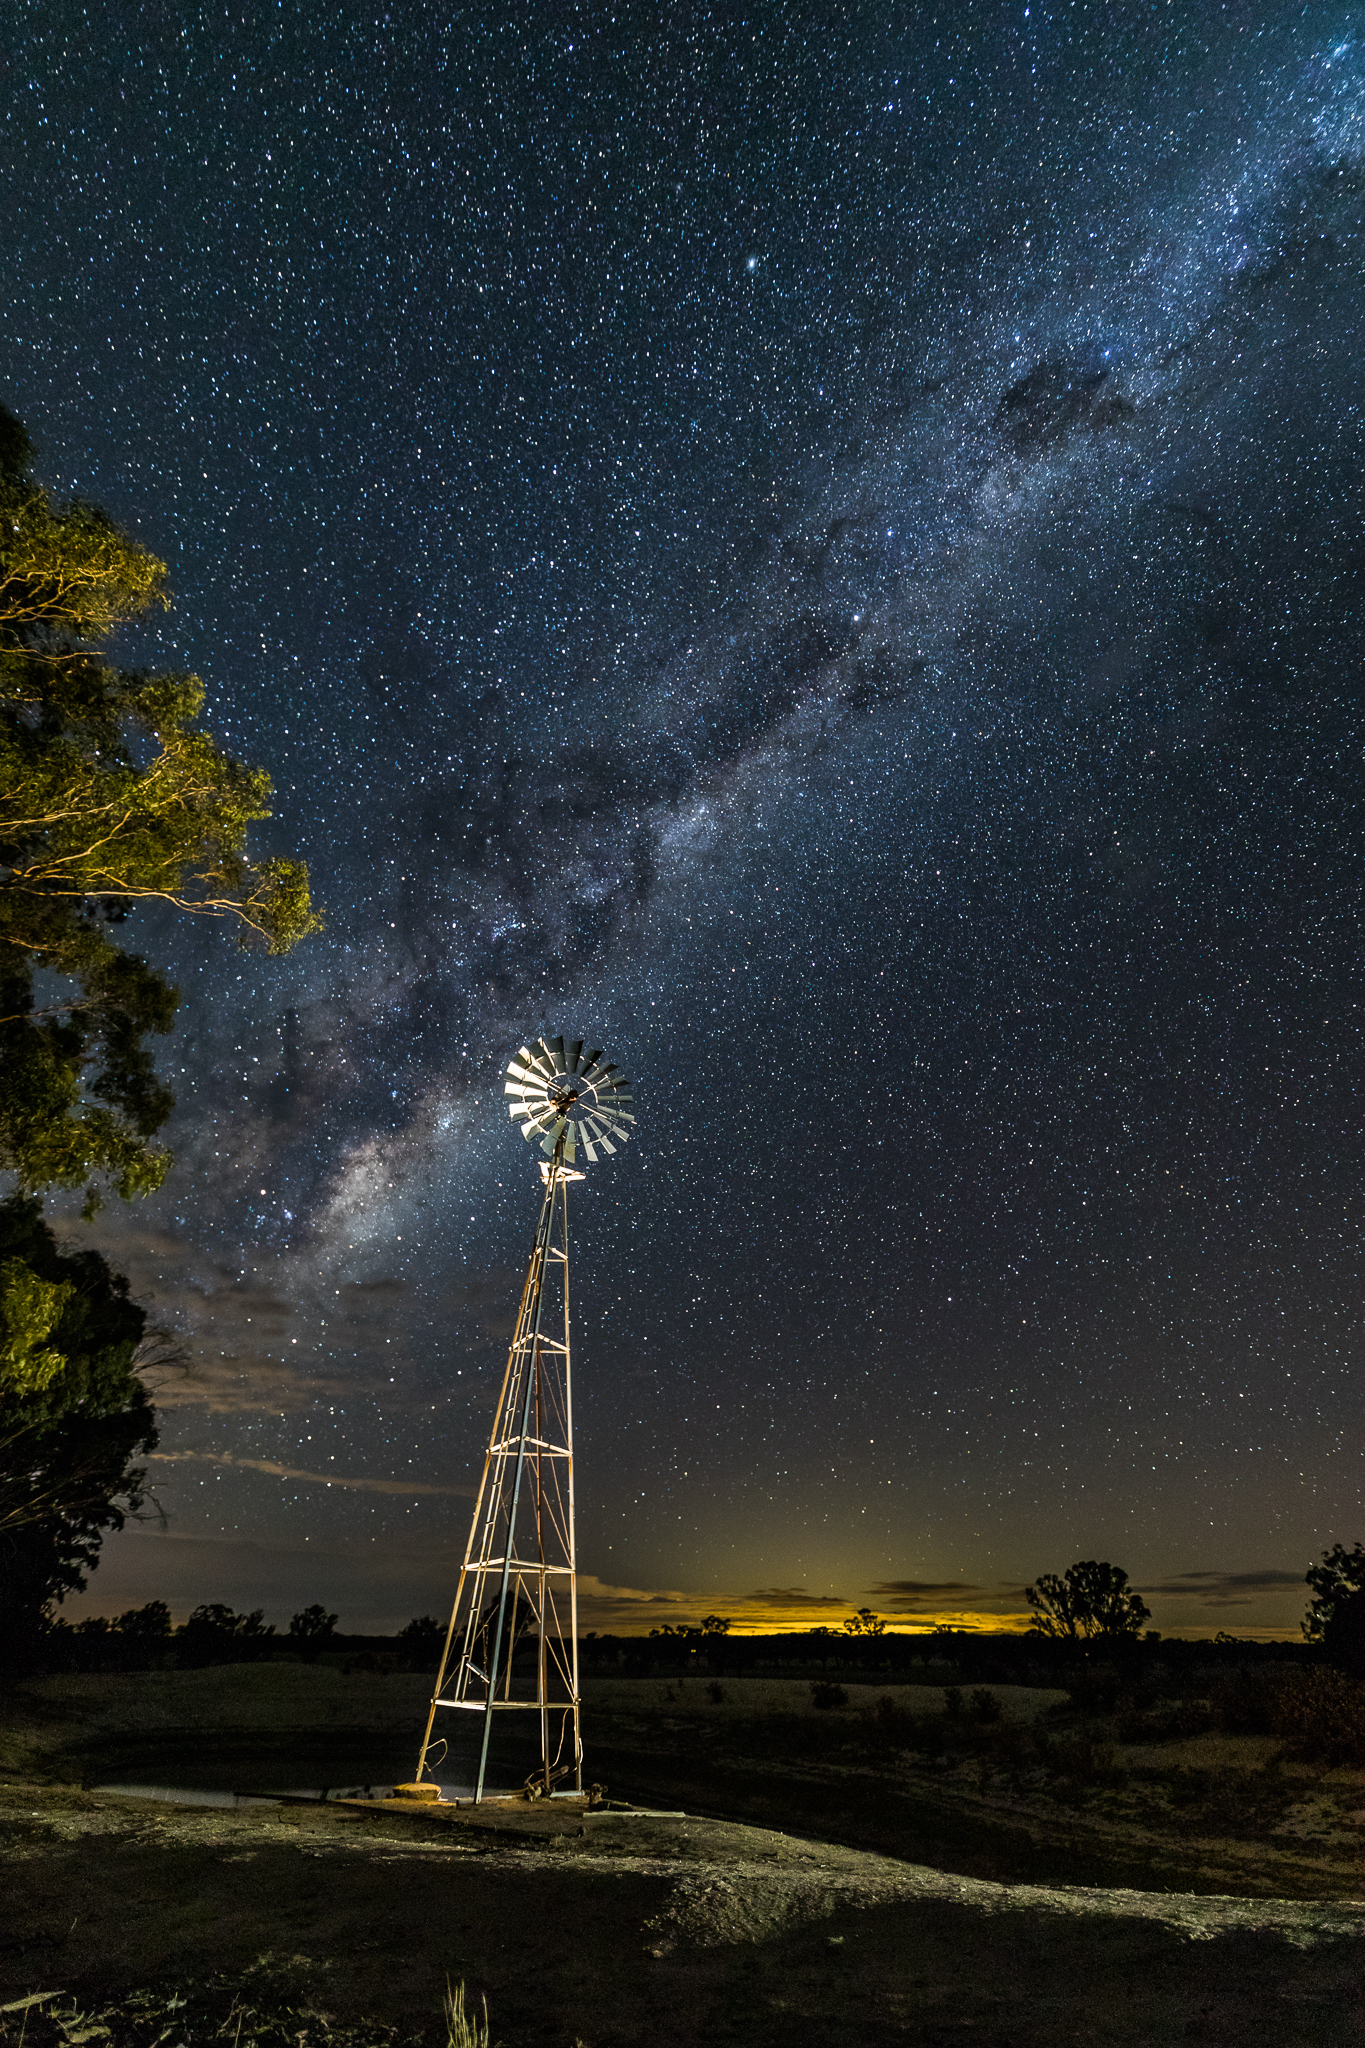 Figure 4 - Light painted Windmill adds interest to the Milky Way background